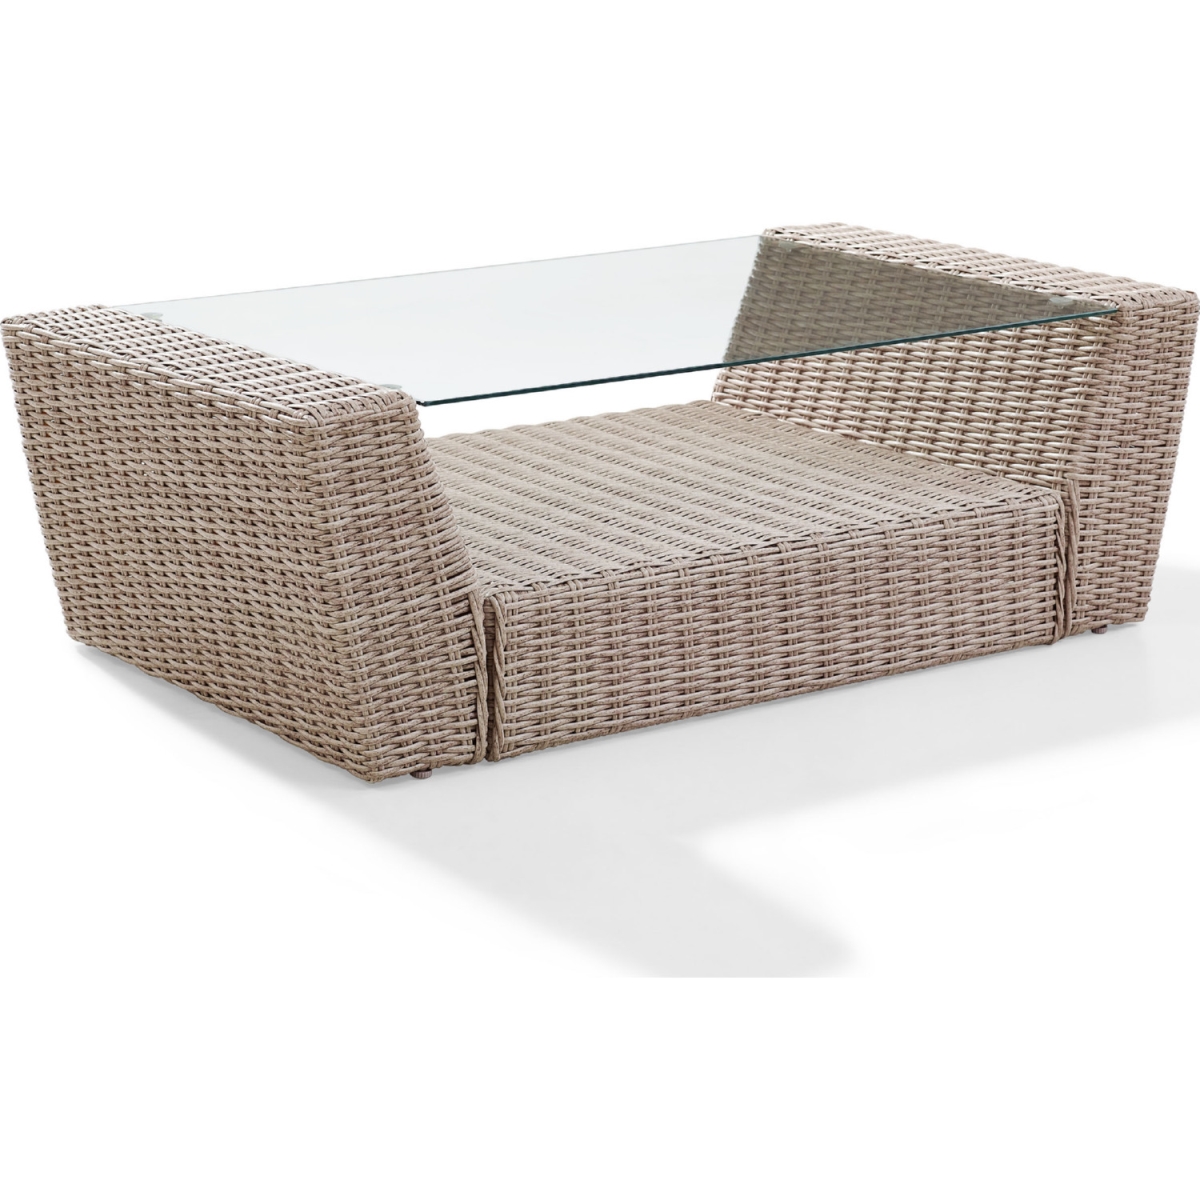 Co7230-wh St. Augustine Outdoor Wicker Coffee Table, Weathered White